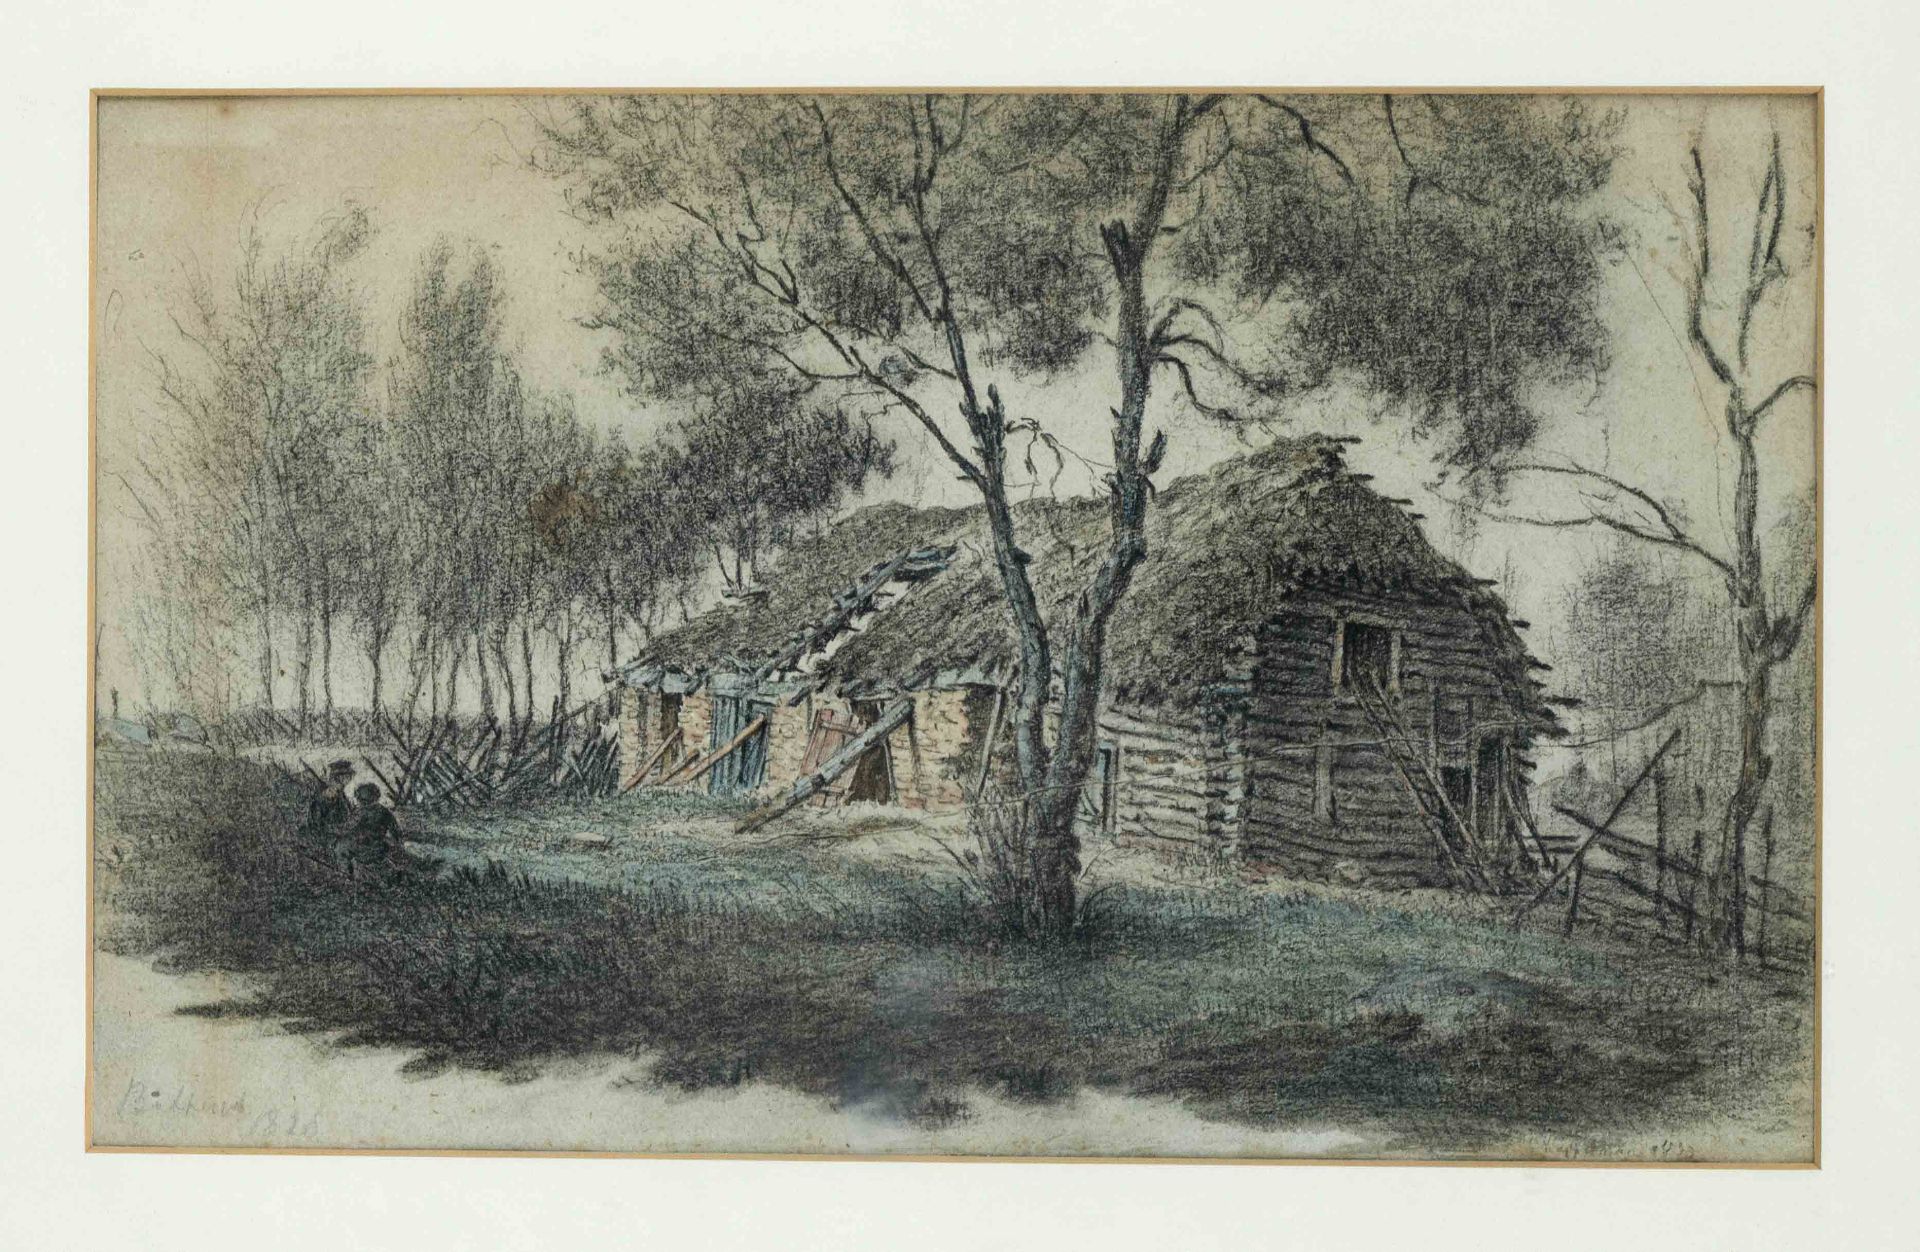 Unidentified artist 1st half 19th century, two people resting in front of a dilapidated barn,